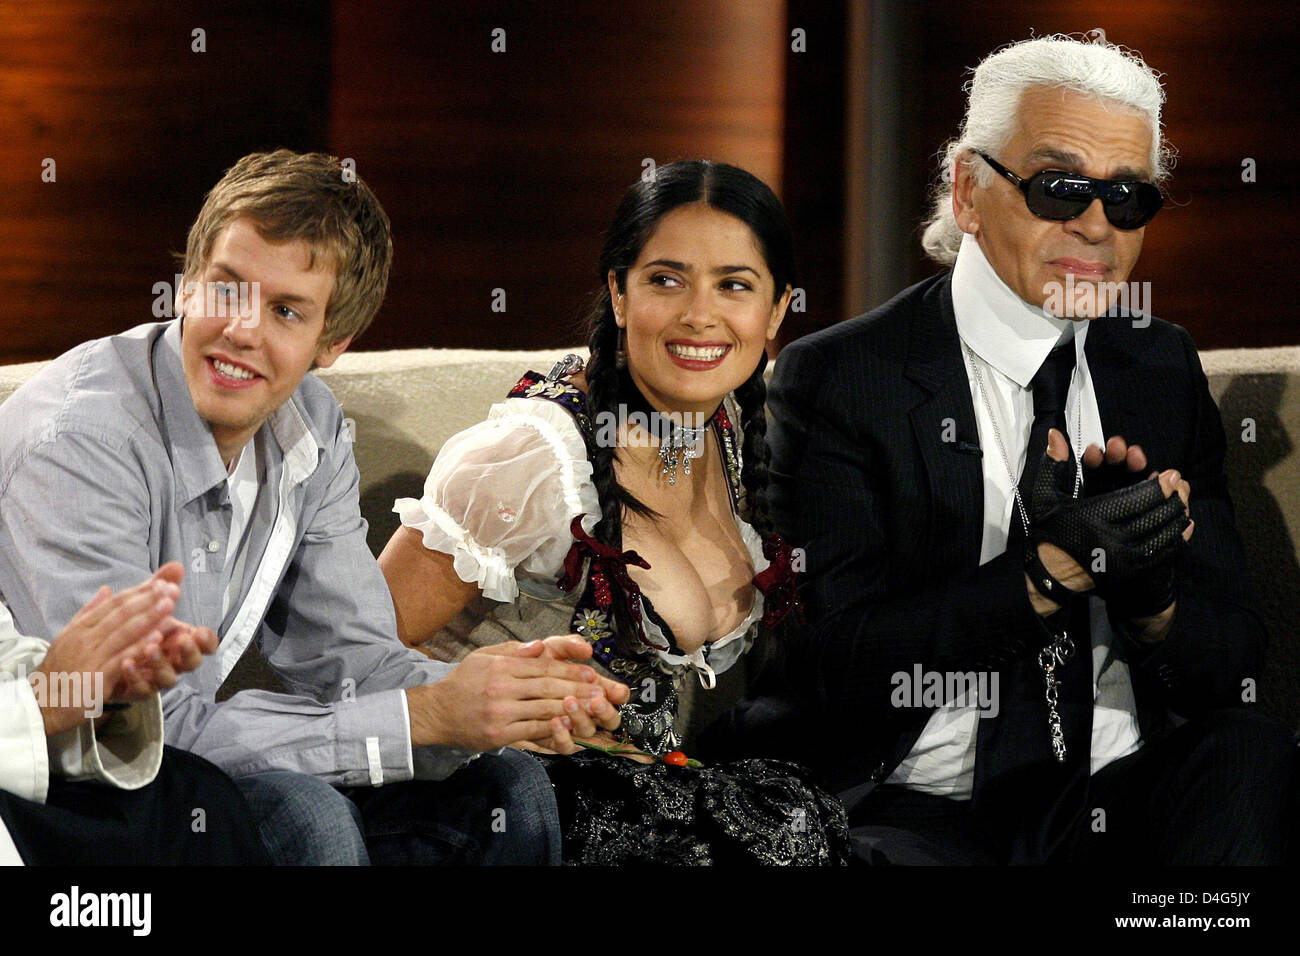 Formula One driver Sebastian Vettel (L-R), actress Salma Hayek and fashion  designer Karl Lagerfeld smile during the famous entertainment show 'Wetten,  dass..?' (Wanna Bet..?) broadcasted by public service channel ZDF in  Nuremberg,